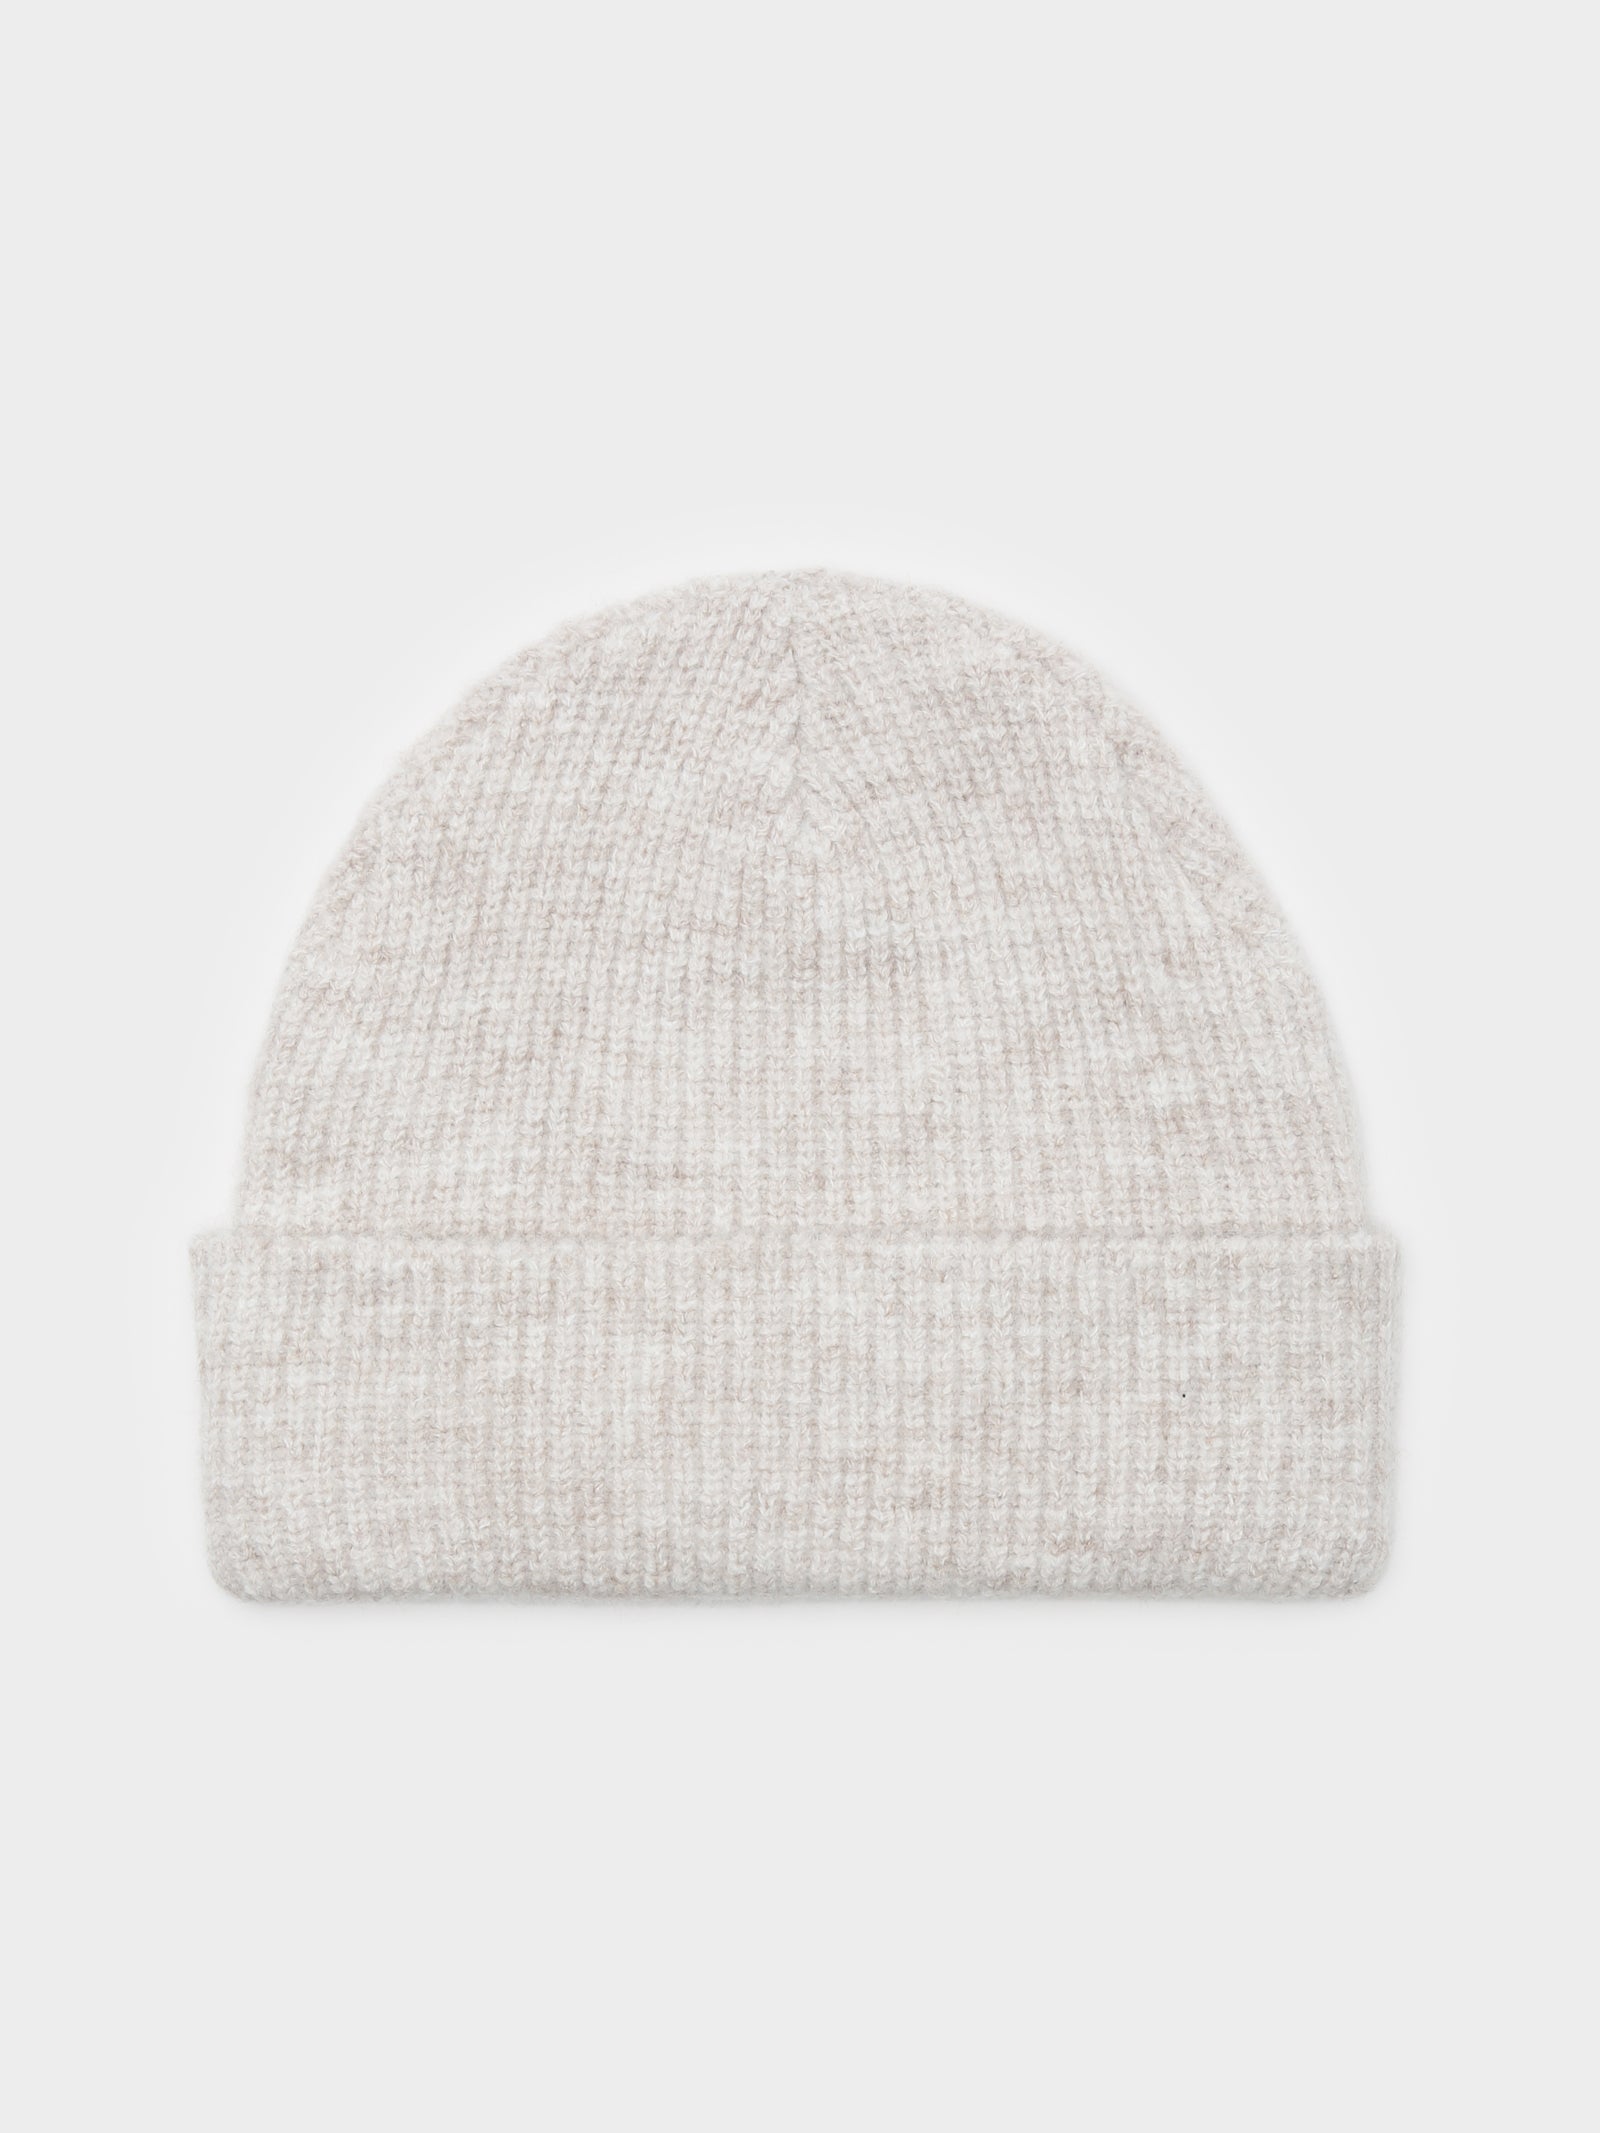 Beyond Beanie in Natural Grey